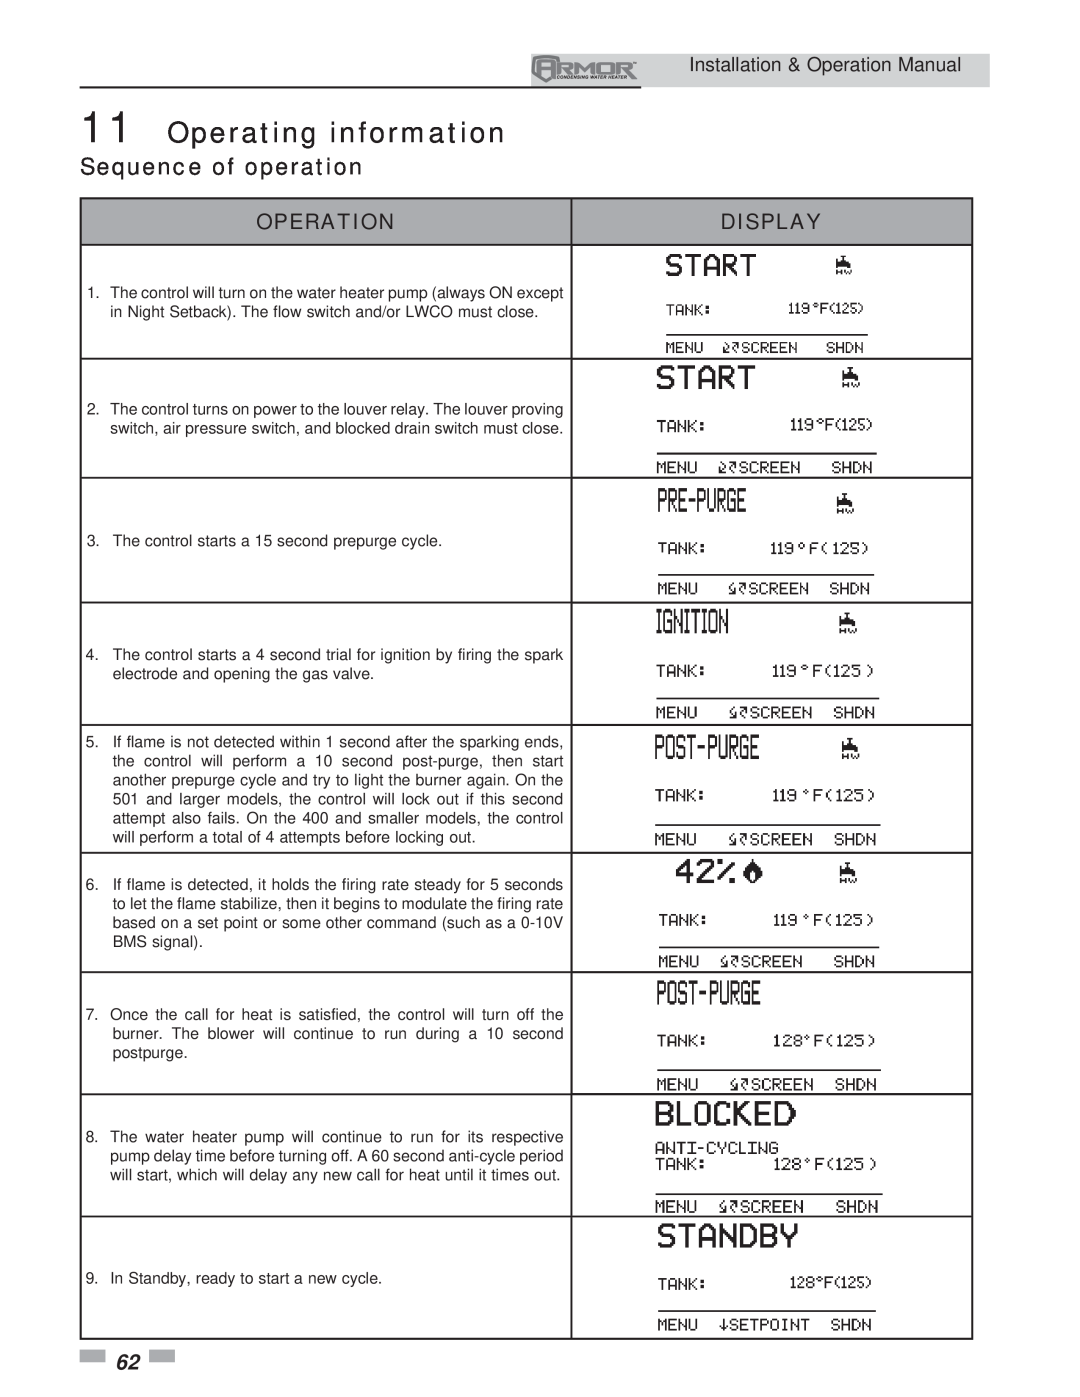 Lochinvar 151 operation manual Sequence of operation, Operation, Display, Operating information 